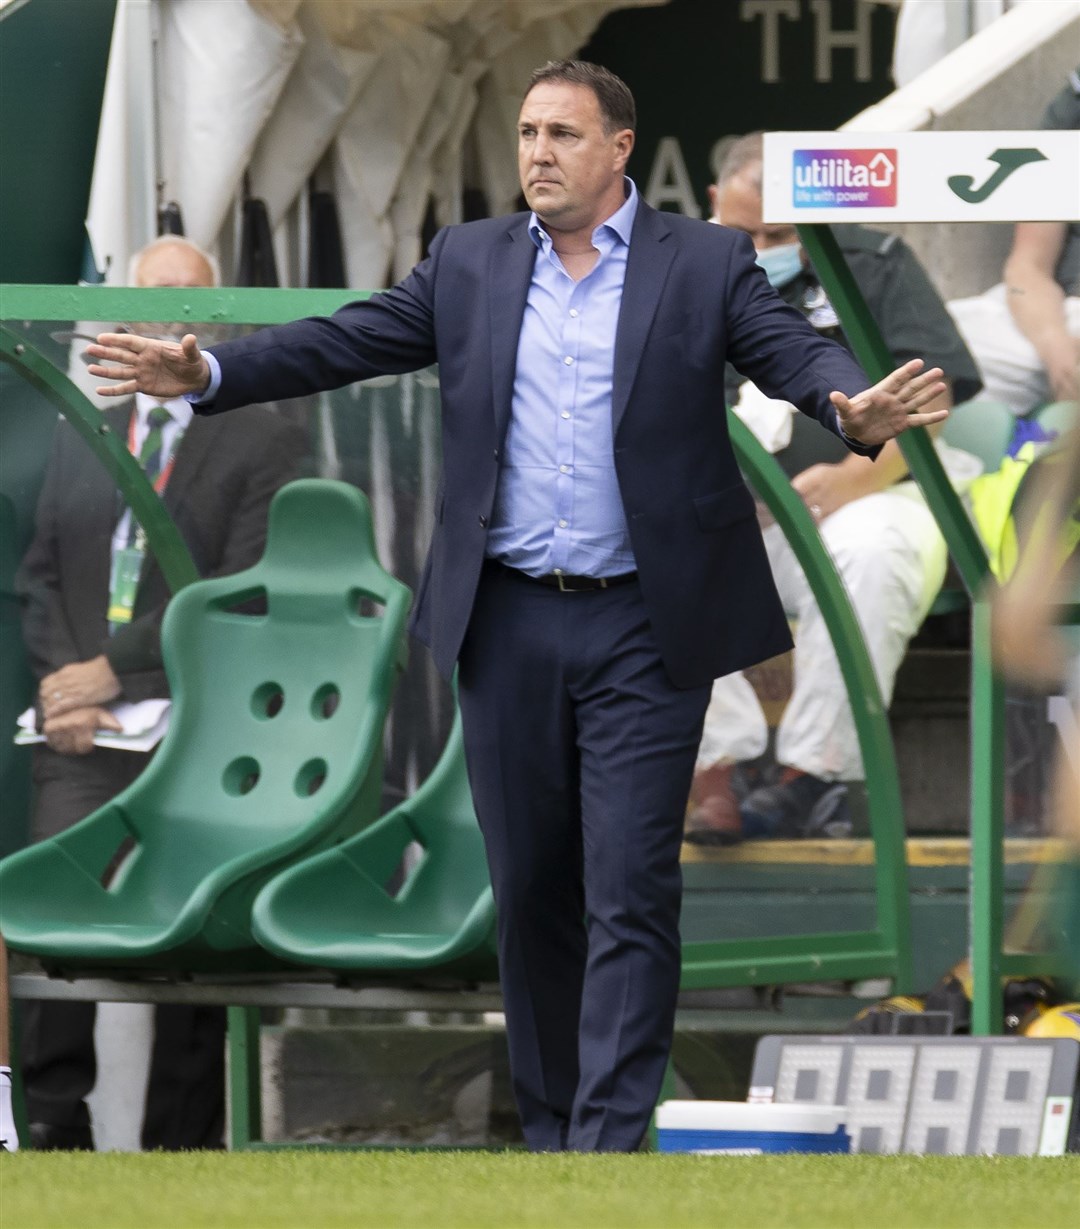 Picture - Ken Macpherson, Inverness. Hibs(3) v Ross County(0). 08.08.21. Ross County manager Malky Mackay.